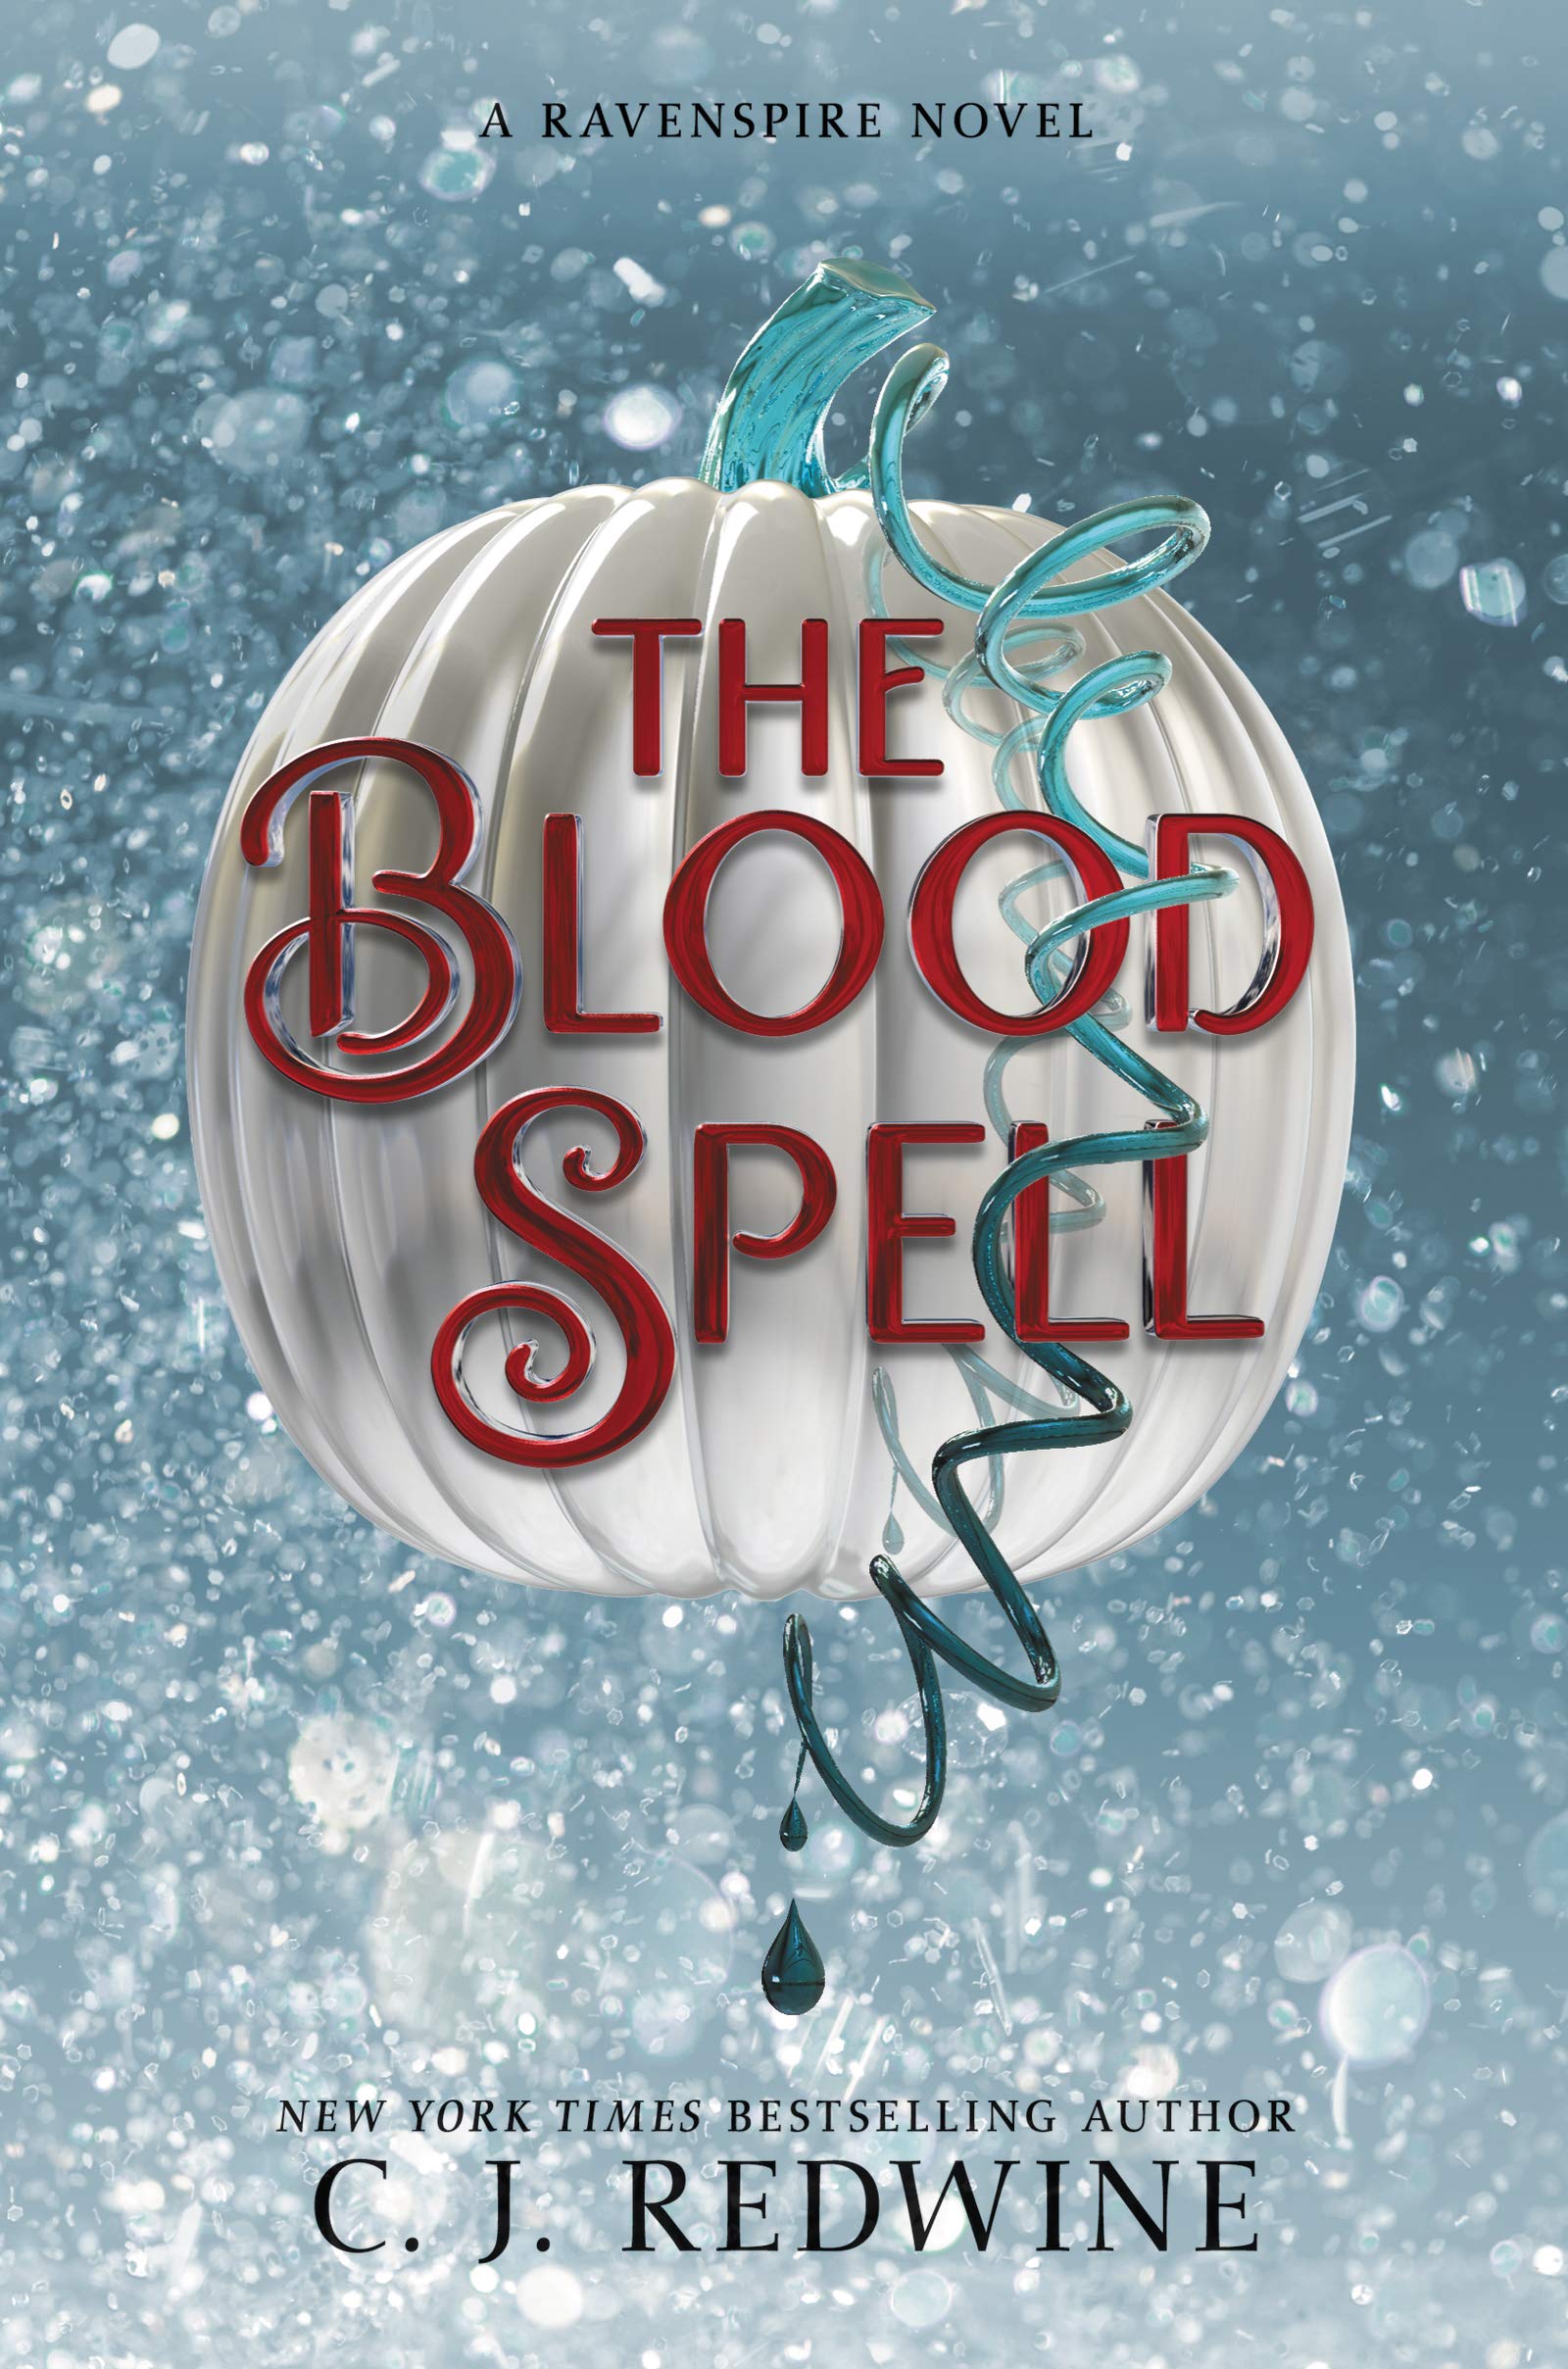 The Blood Spell by C. J. Redwine